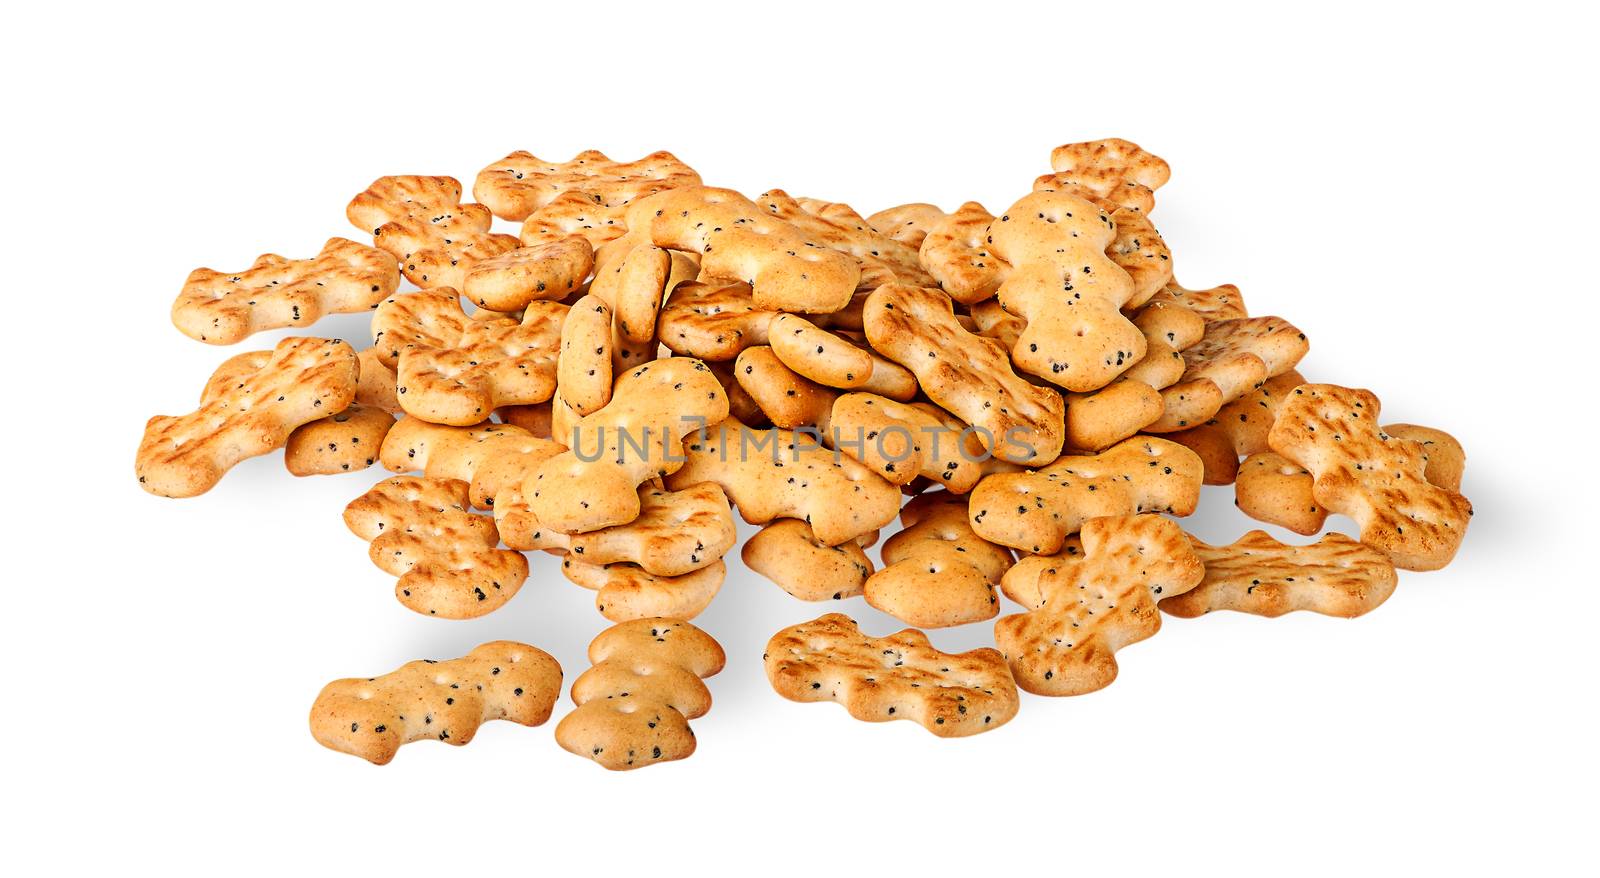 Heap of crackers with poppy seeds isolated on white background